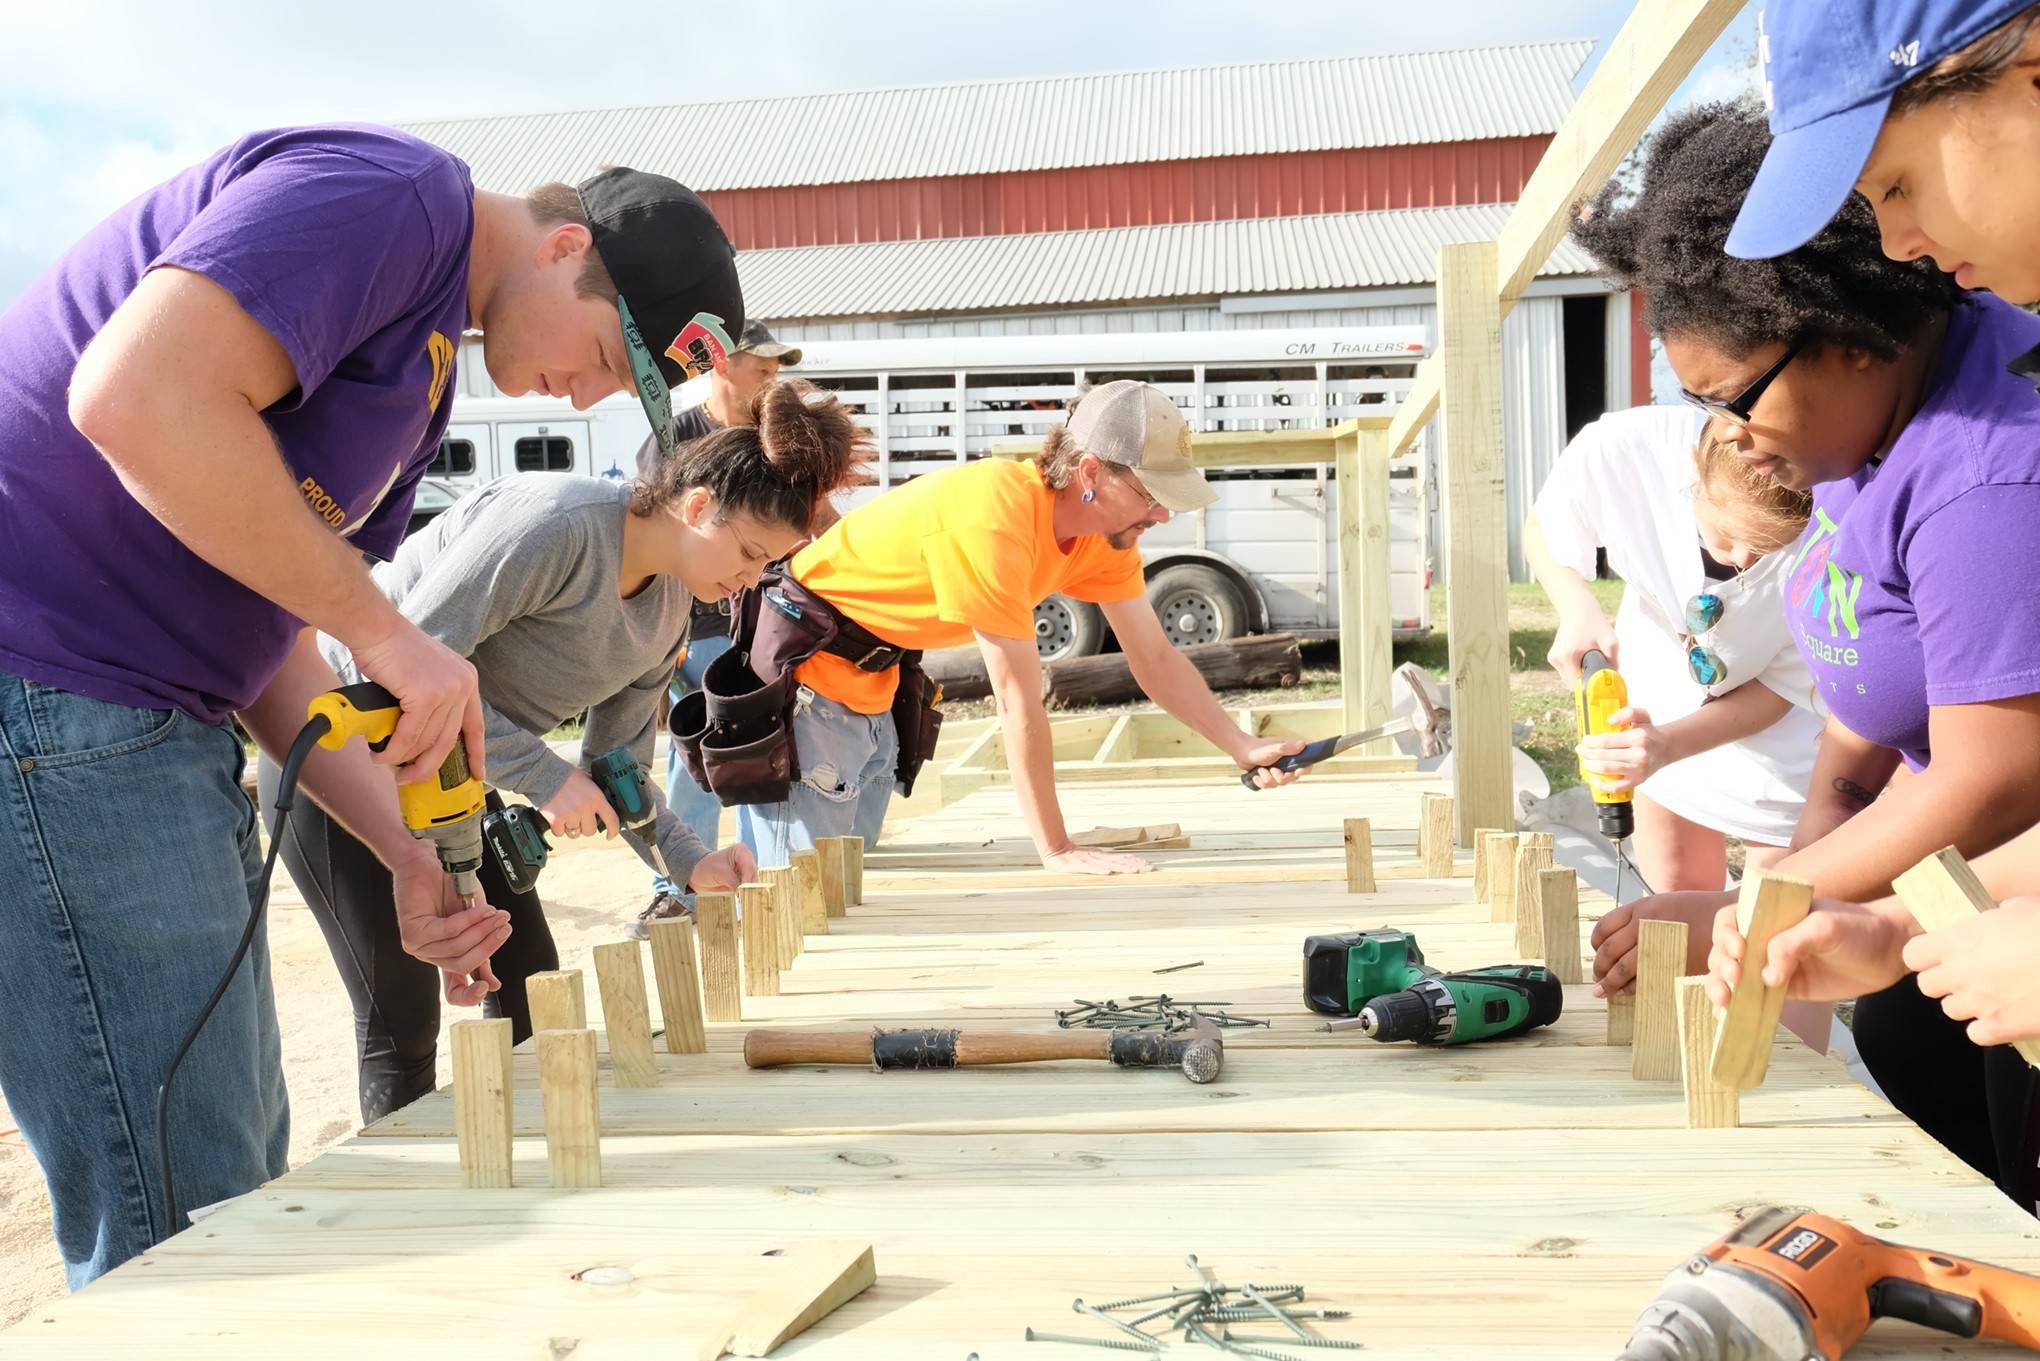 Student volunteers drilling on wood at a building project